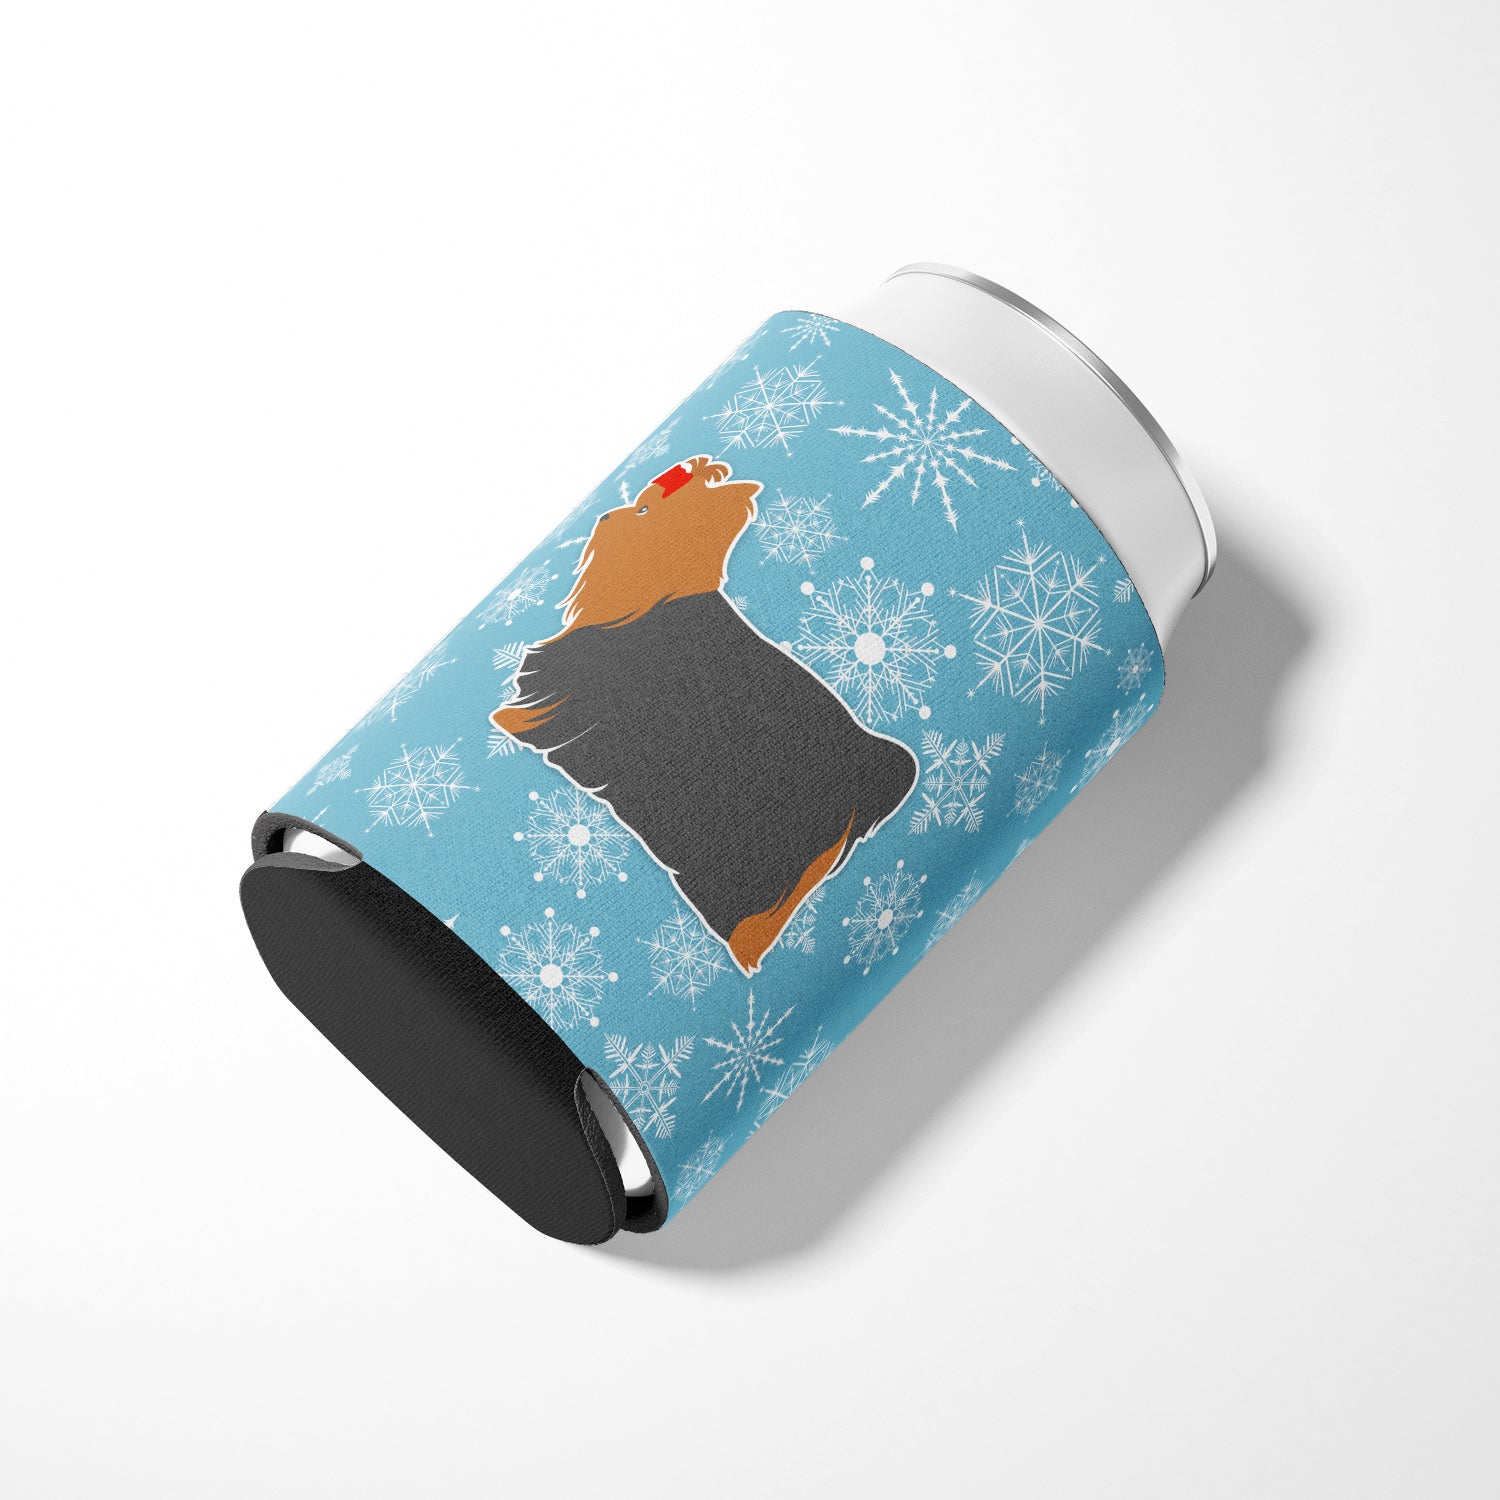 Winter Snowflake Yorkshire Terrier Yorkie Can or Bottle Hugger BB3534CC  the-store.com.